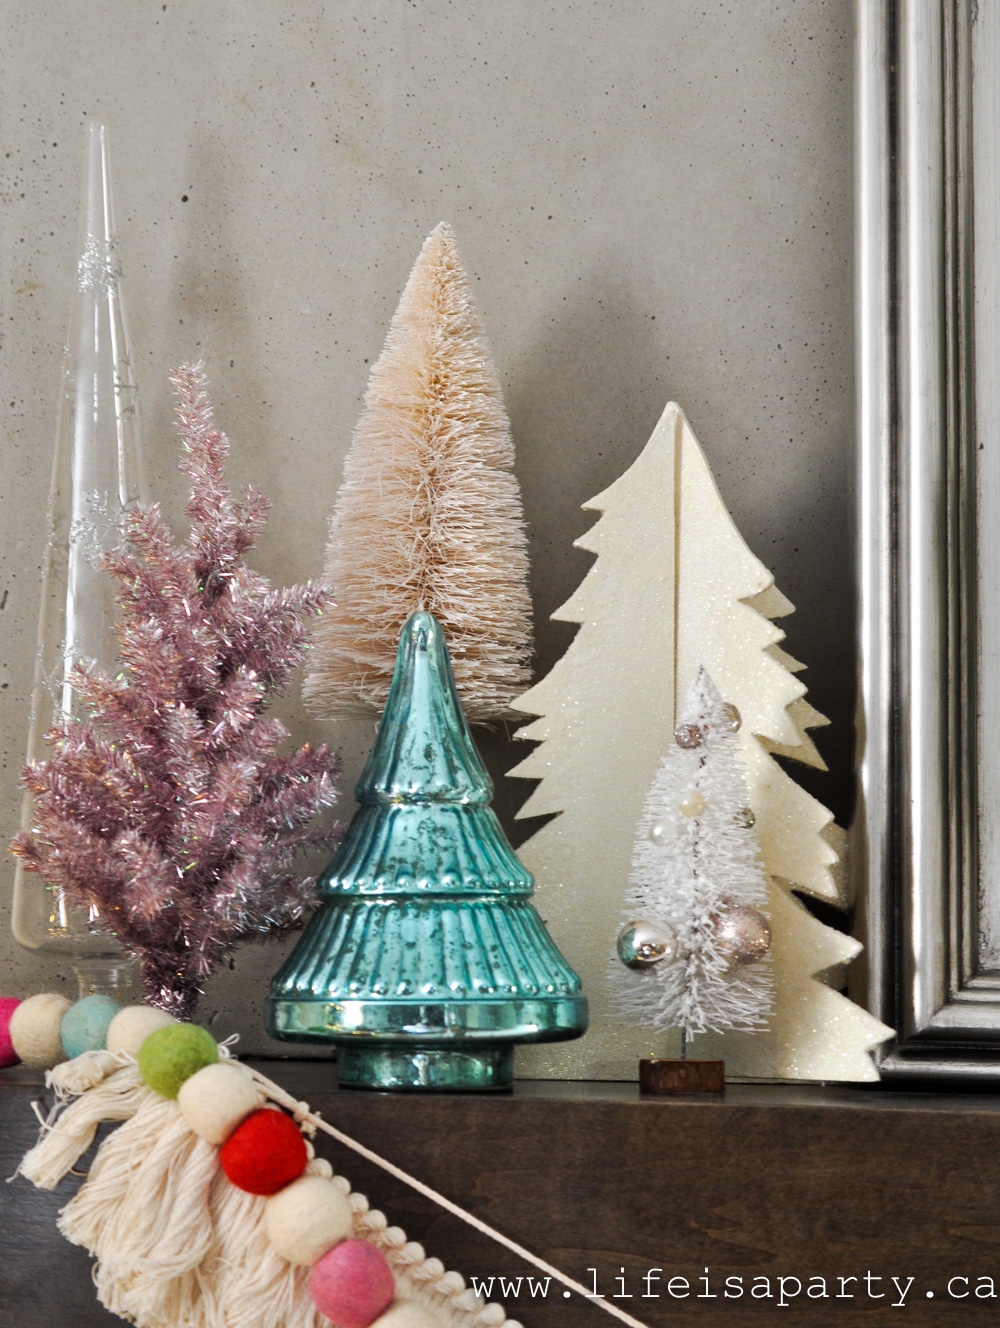  Anthropologie inspired colourful pastel Christmas decor